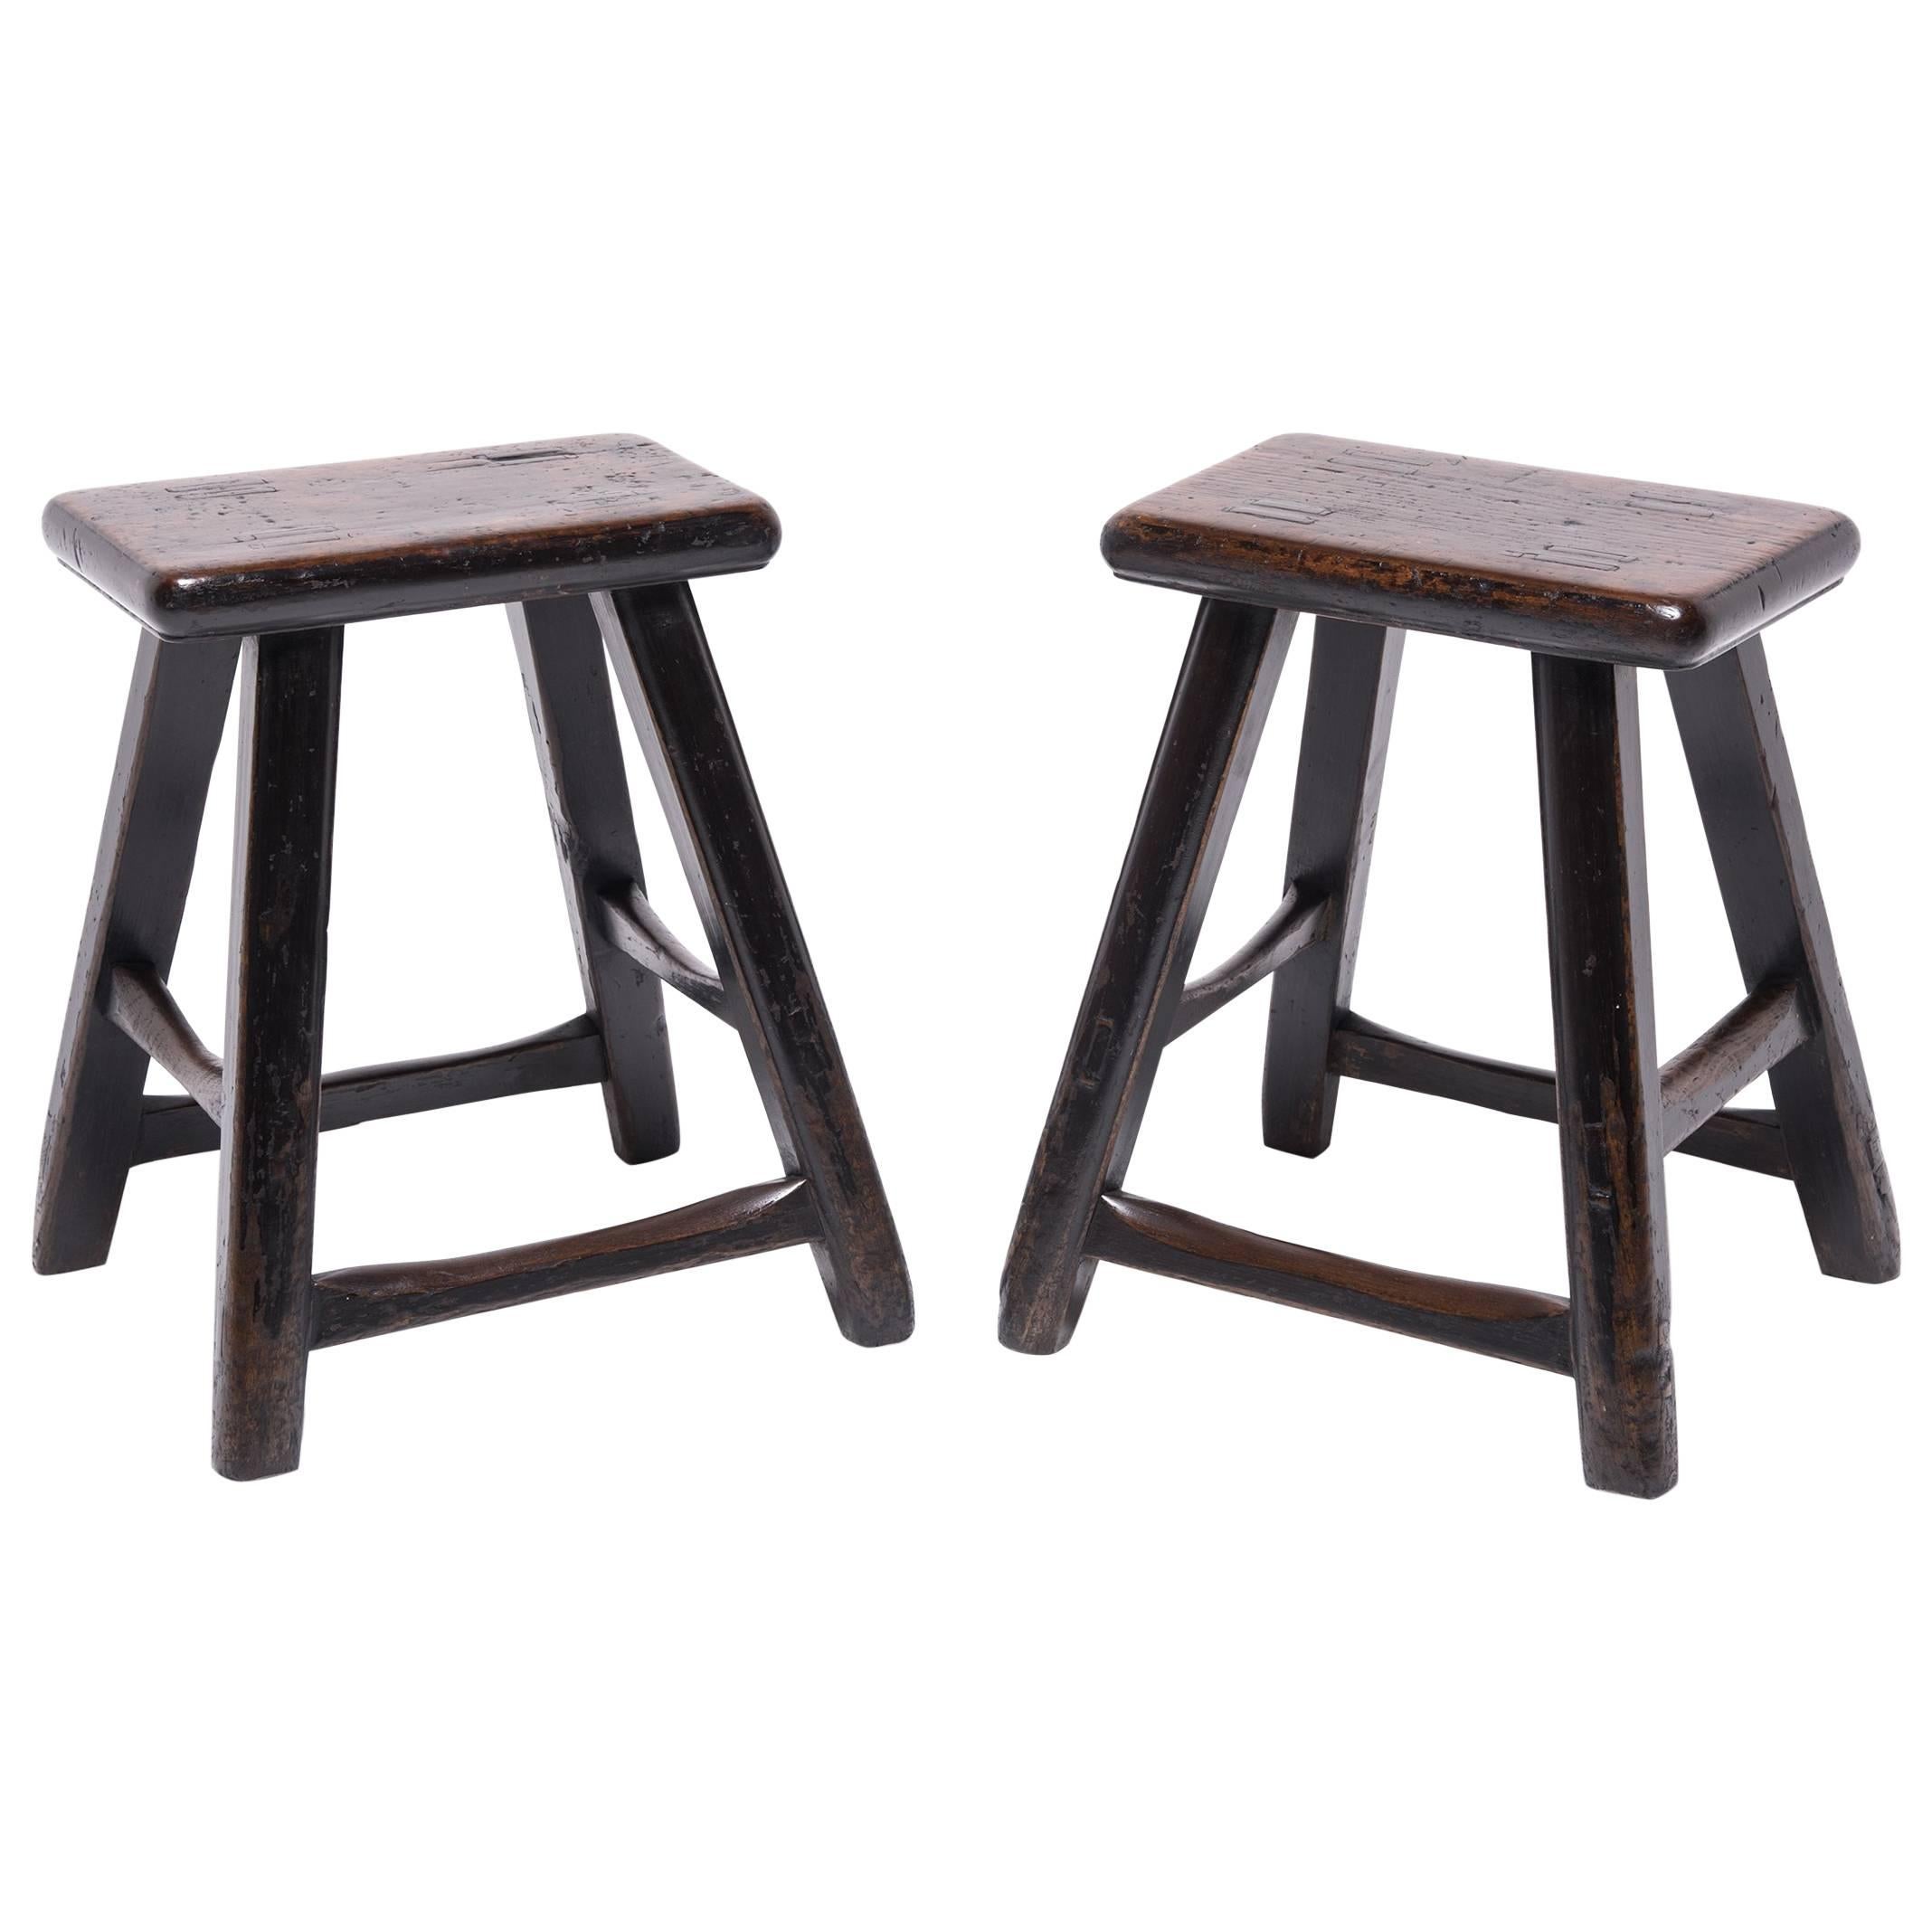 Pair of 19th Century Chinese Tapered Four Leg Stools